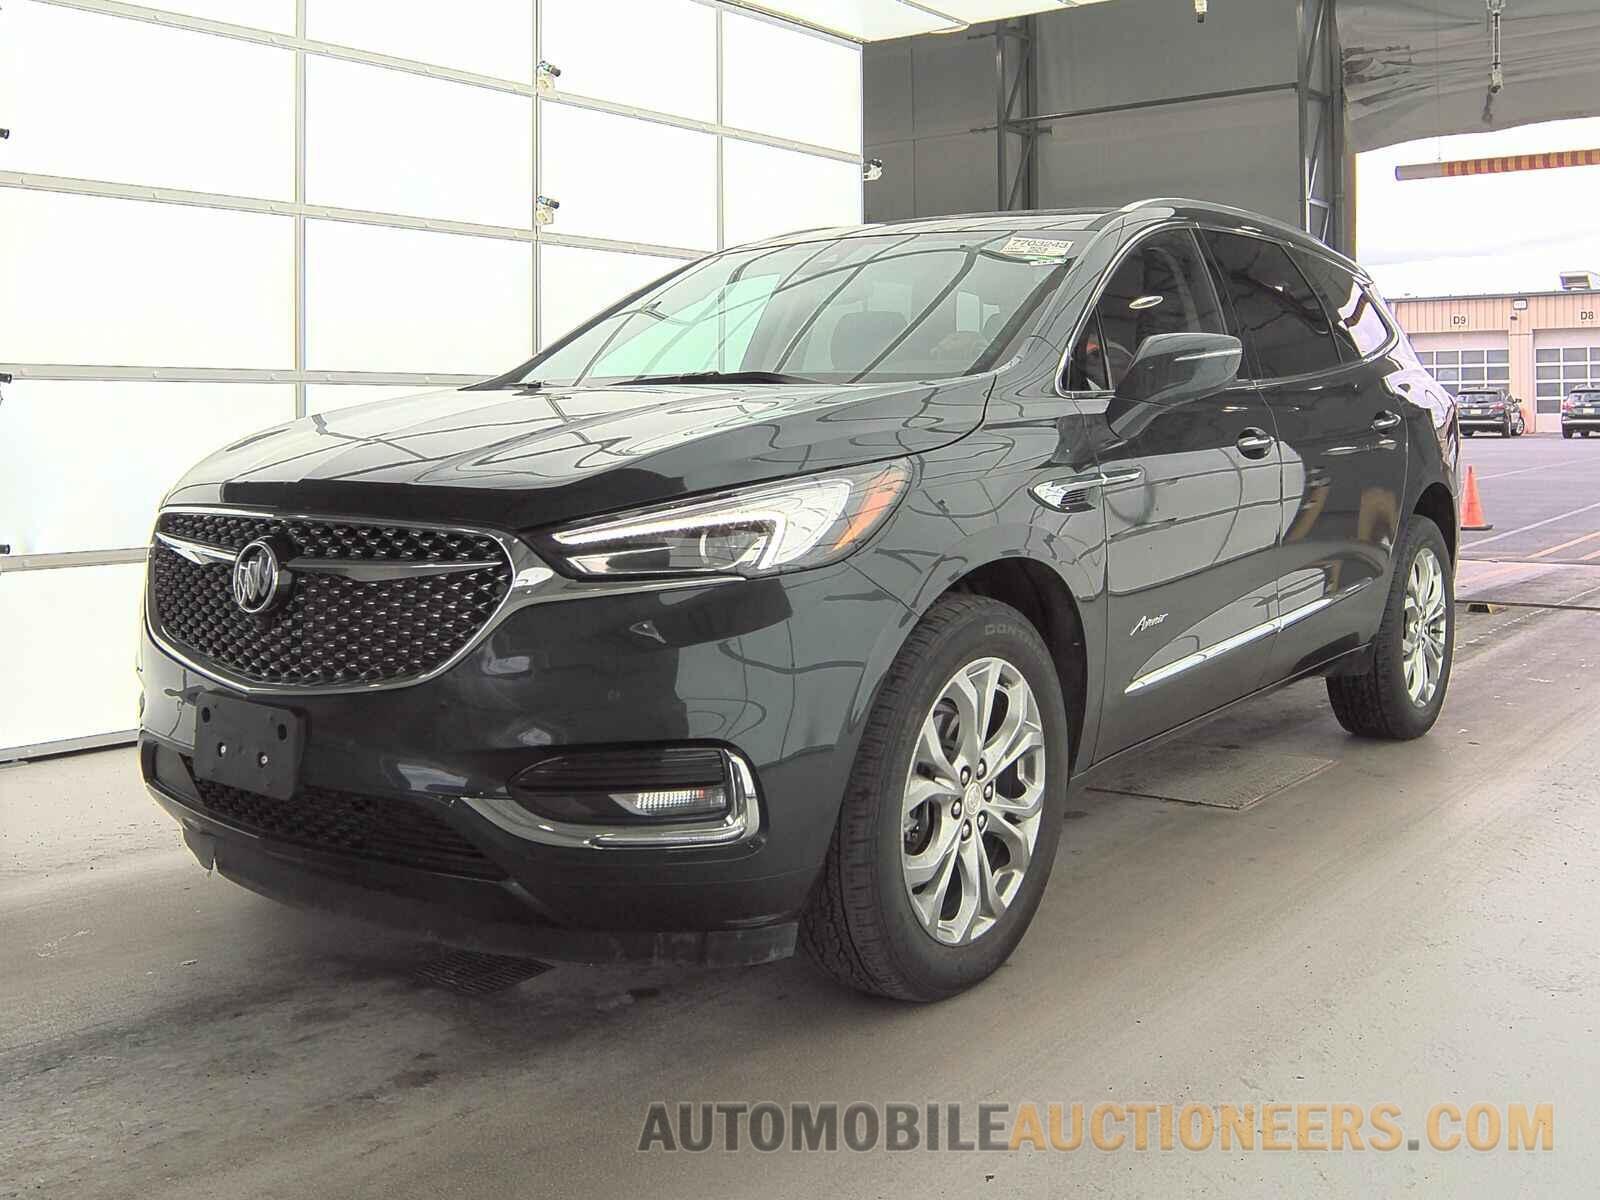 5GAEVCKW0MJ168832 Buick Enclave 2021